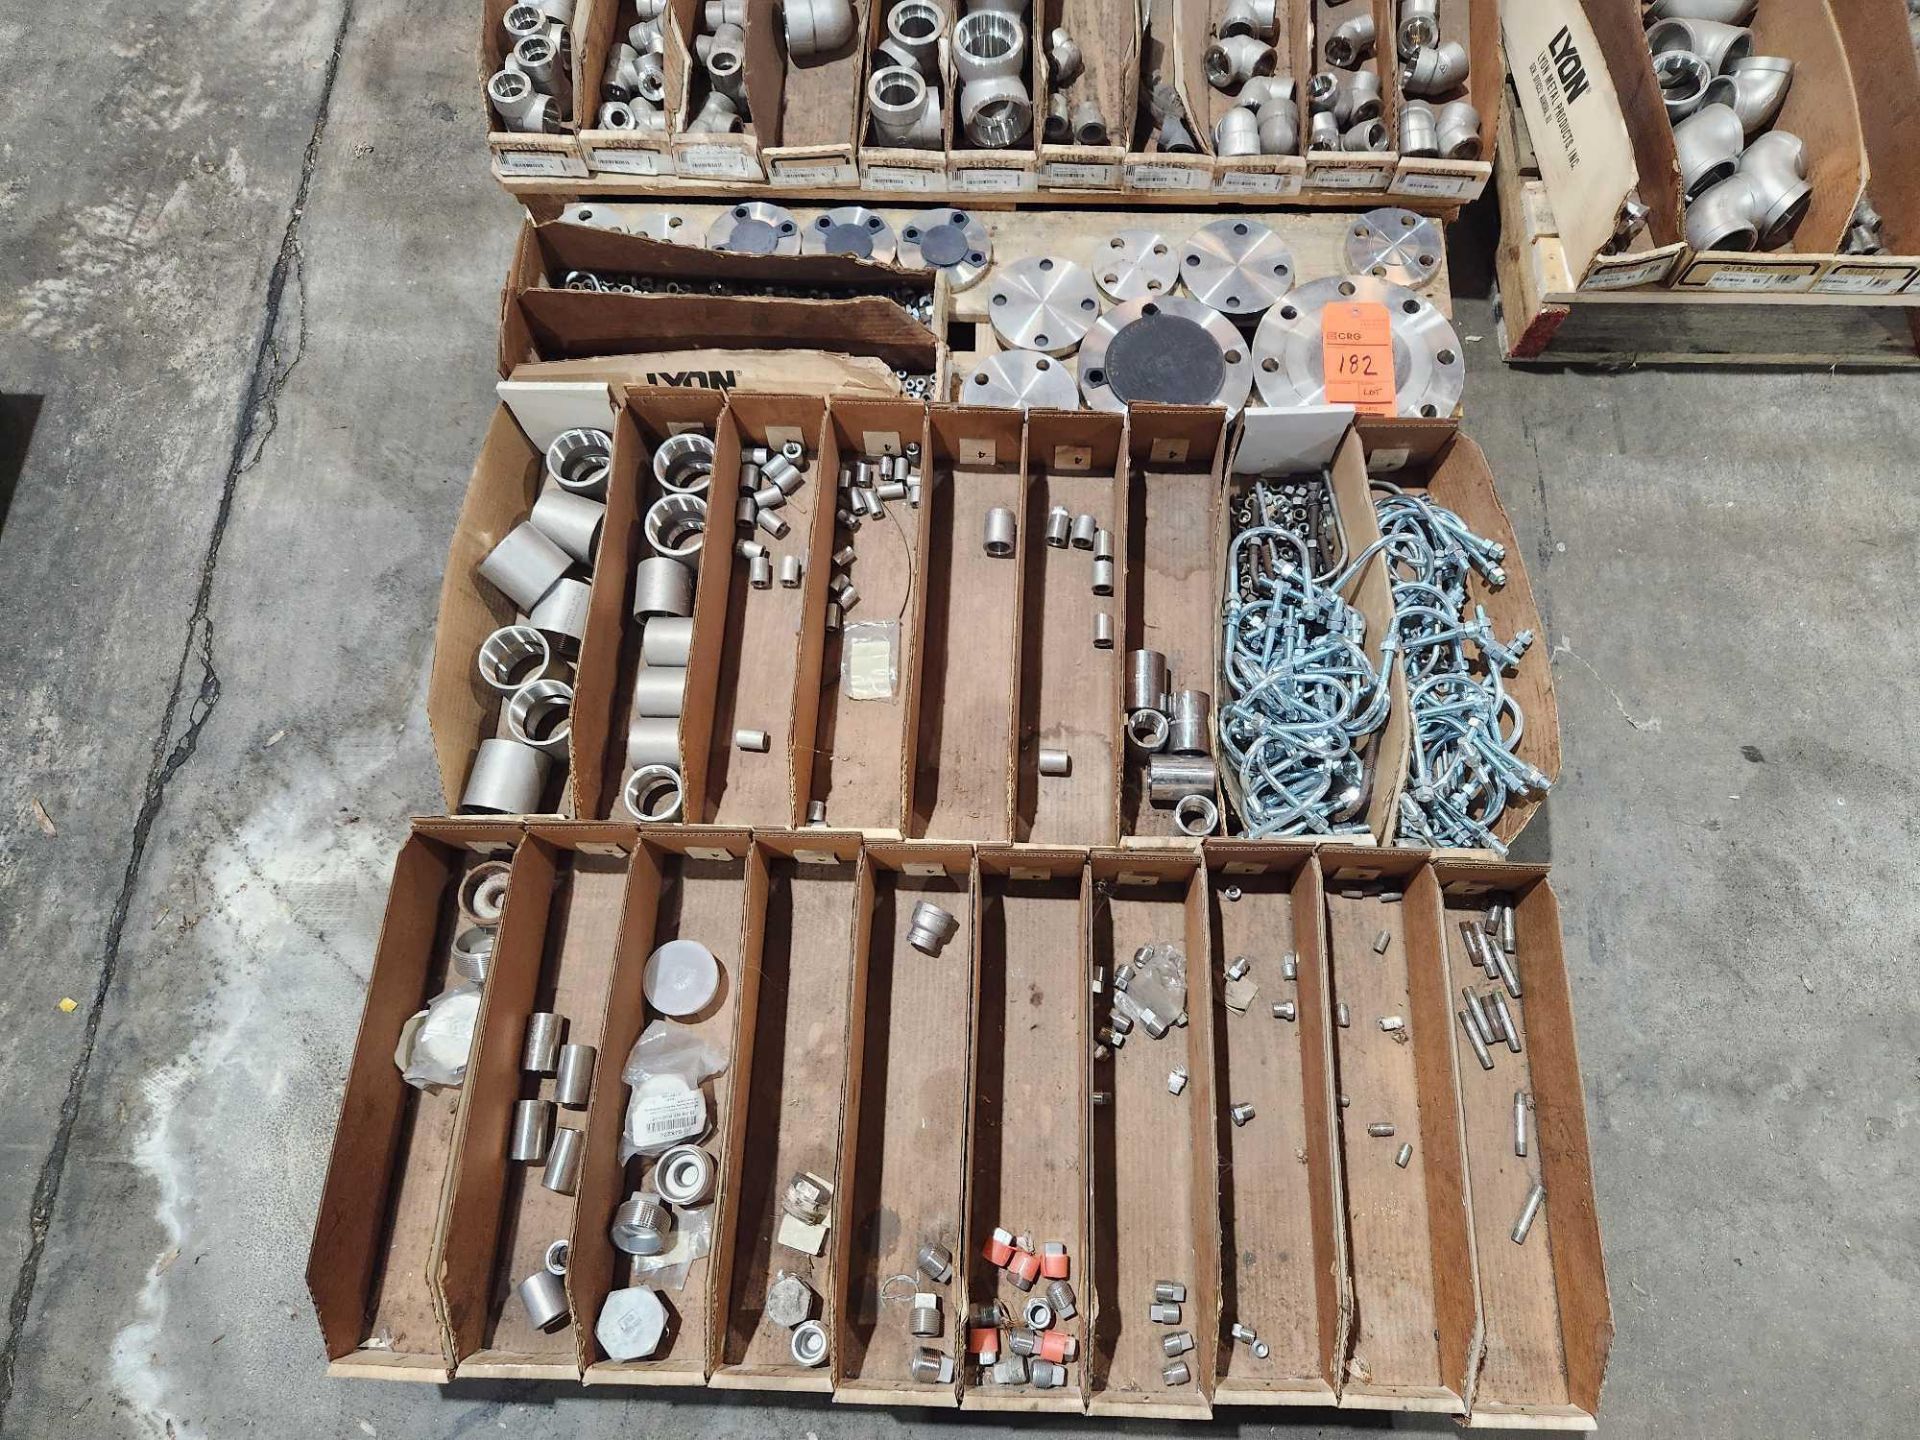 Lot asst stainless steel fittings, connectors, adapters, etc. (SORTED BY SIZE IN CARDBOARD BOXES), - Image 2 of 8